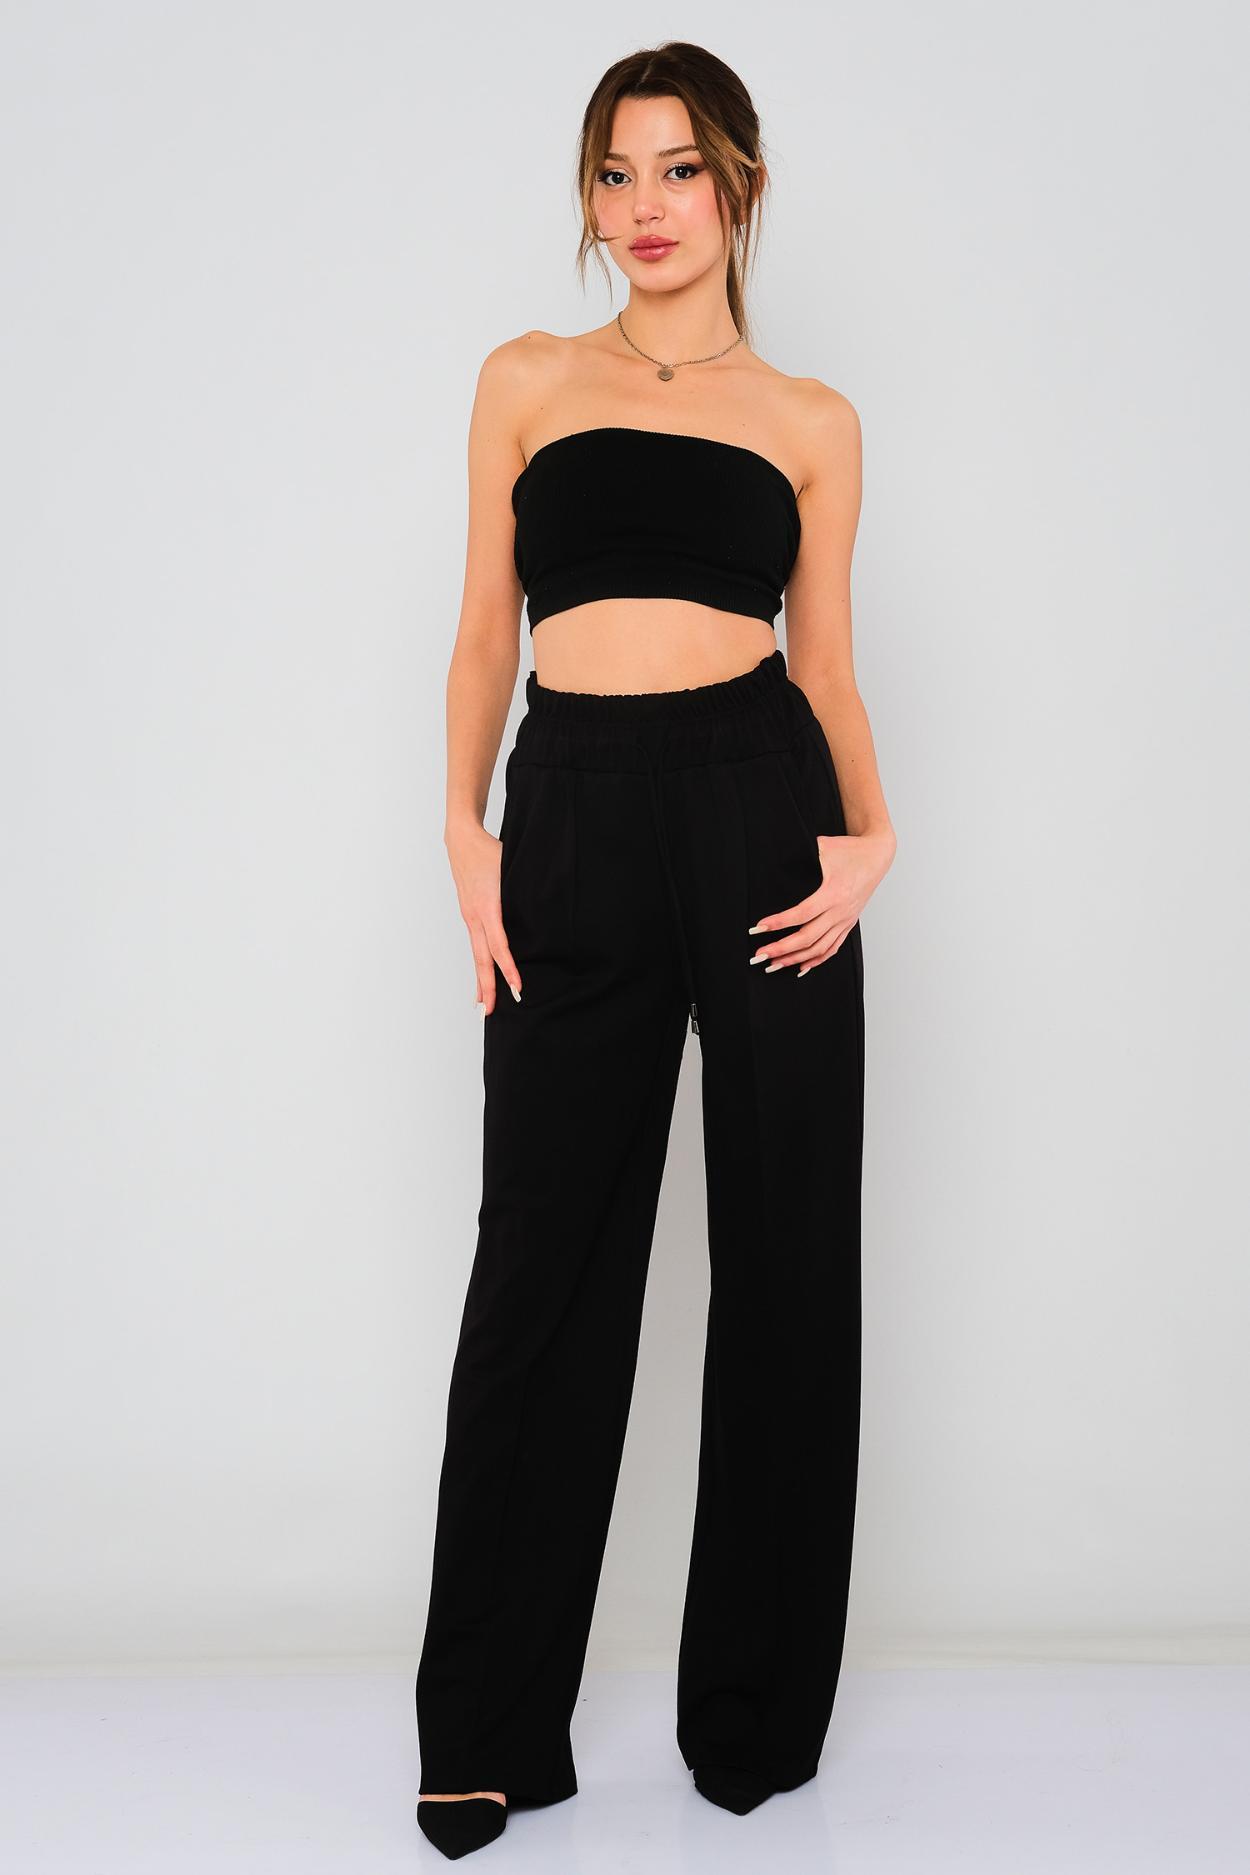 High Waist Trousers For Womens on Sale - Buy Womens Pants Online